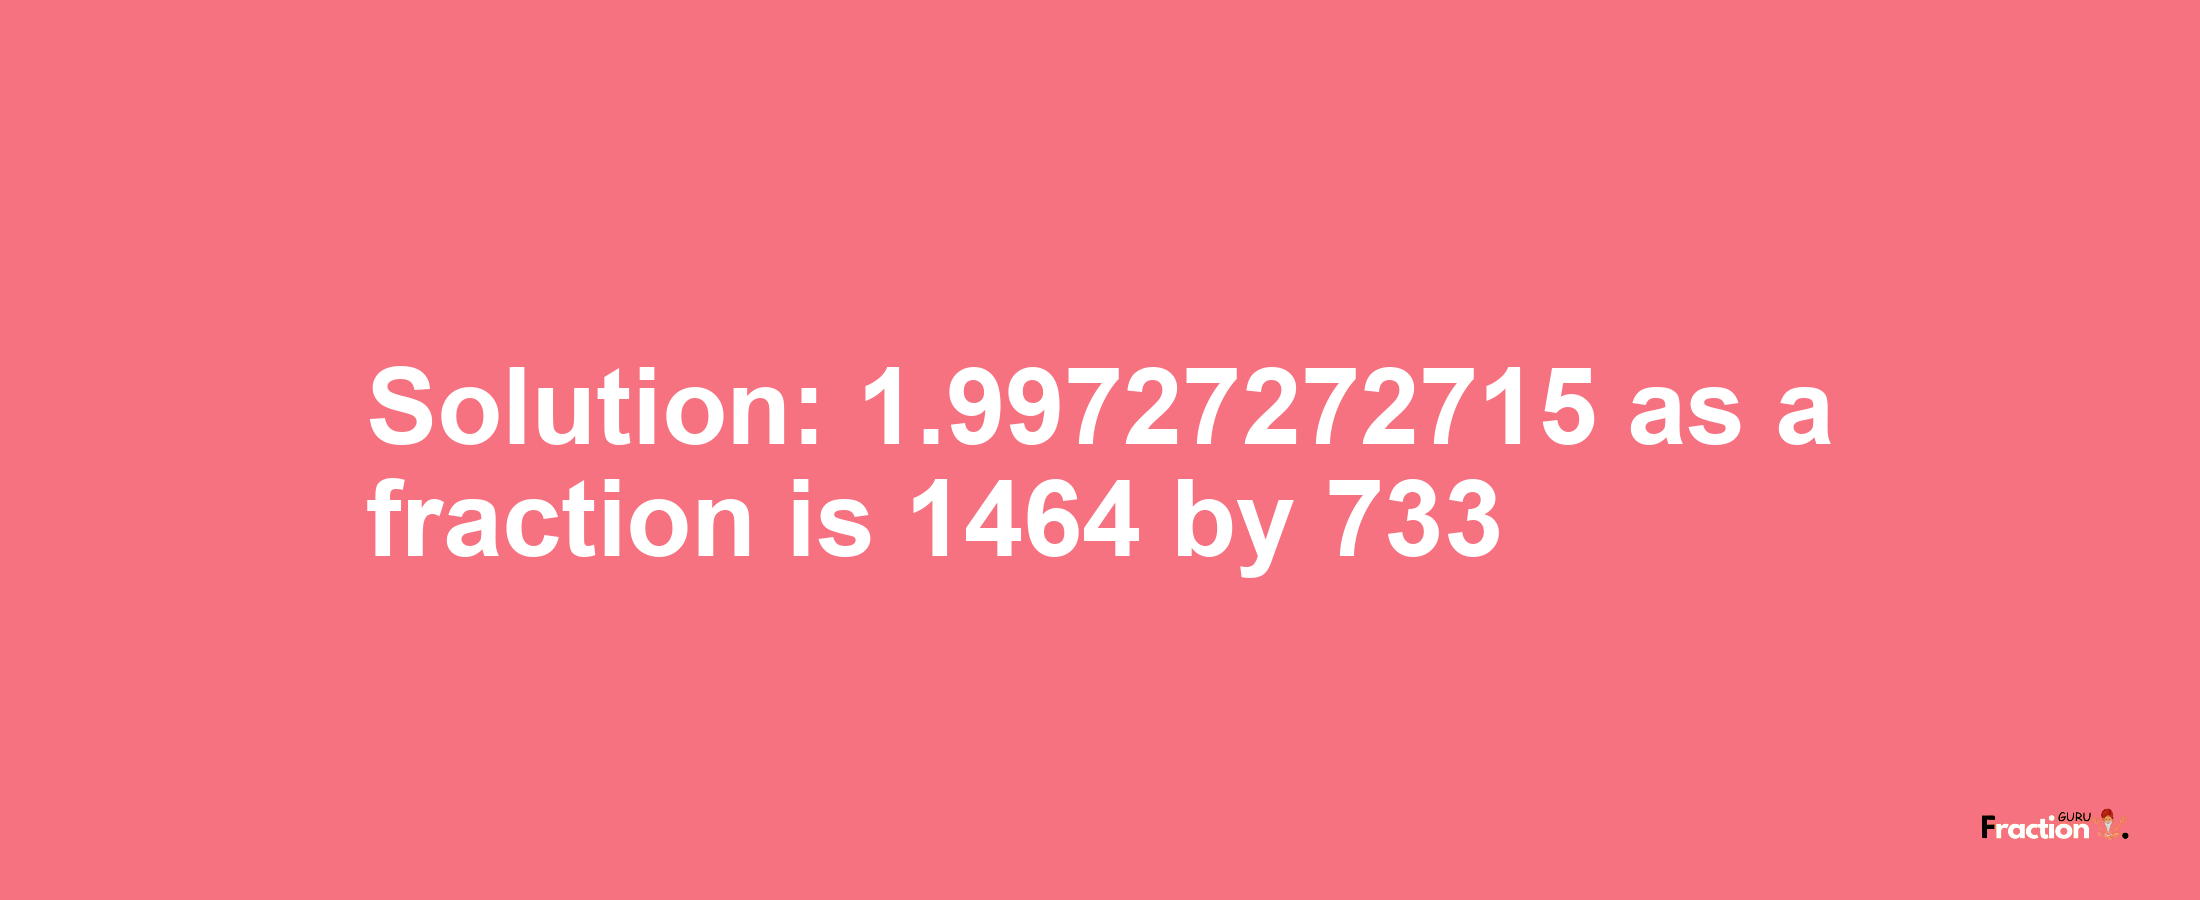 Solution:1.99727272715 as a fraction is 1464/733